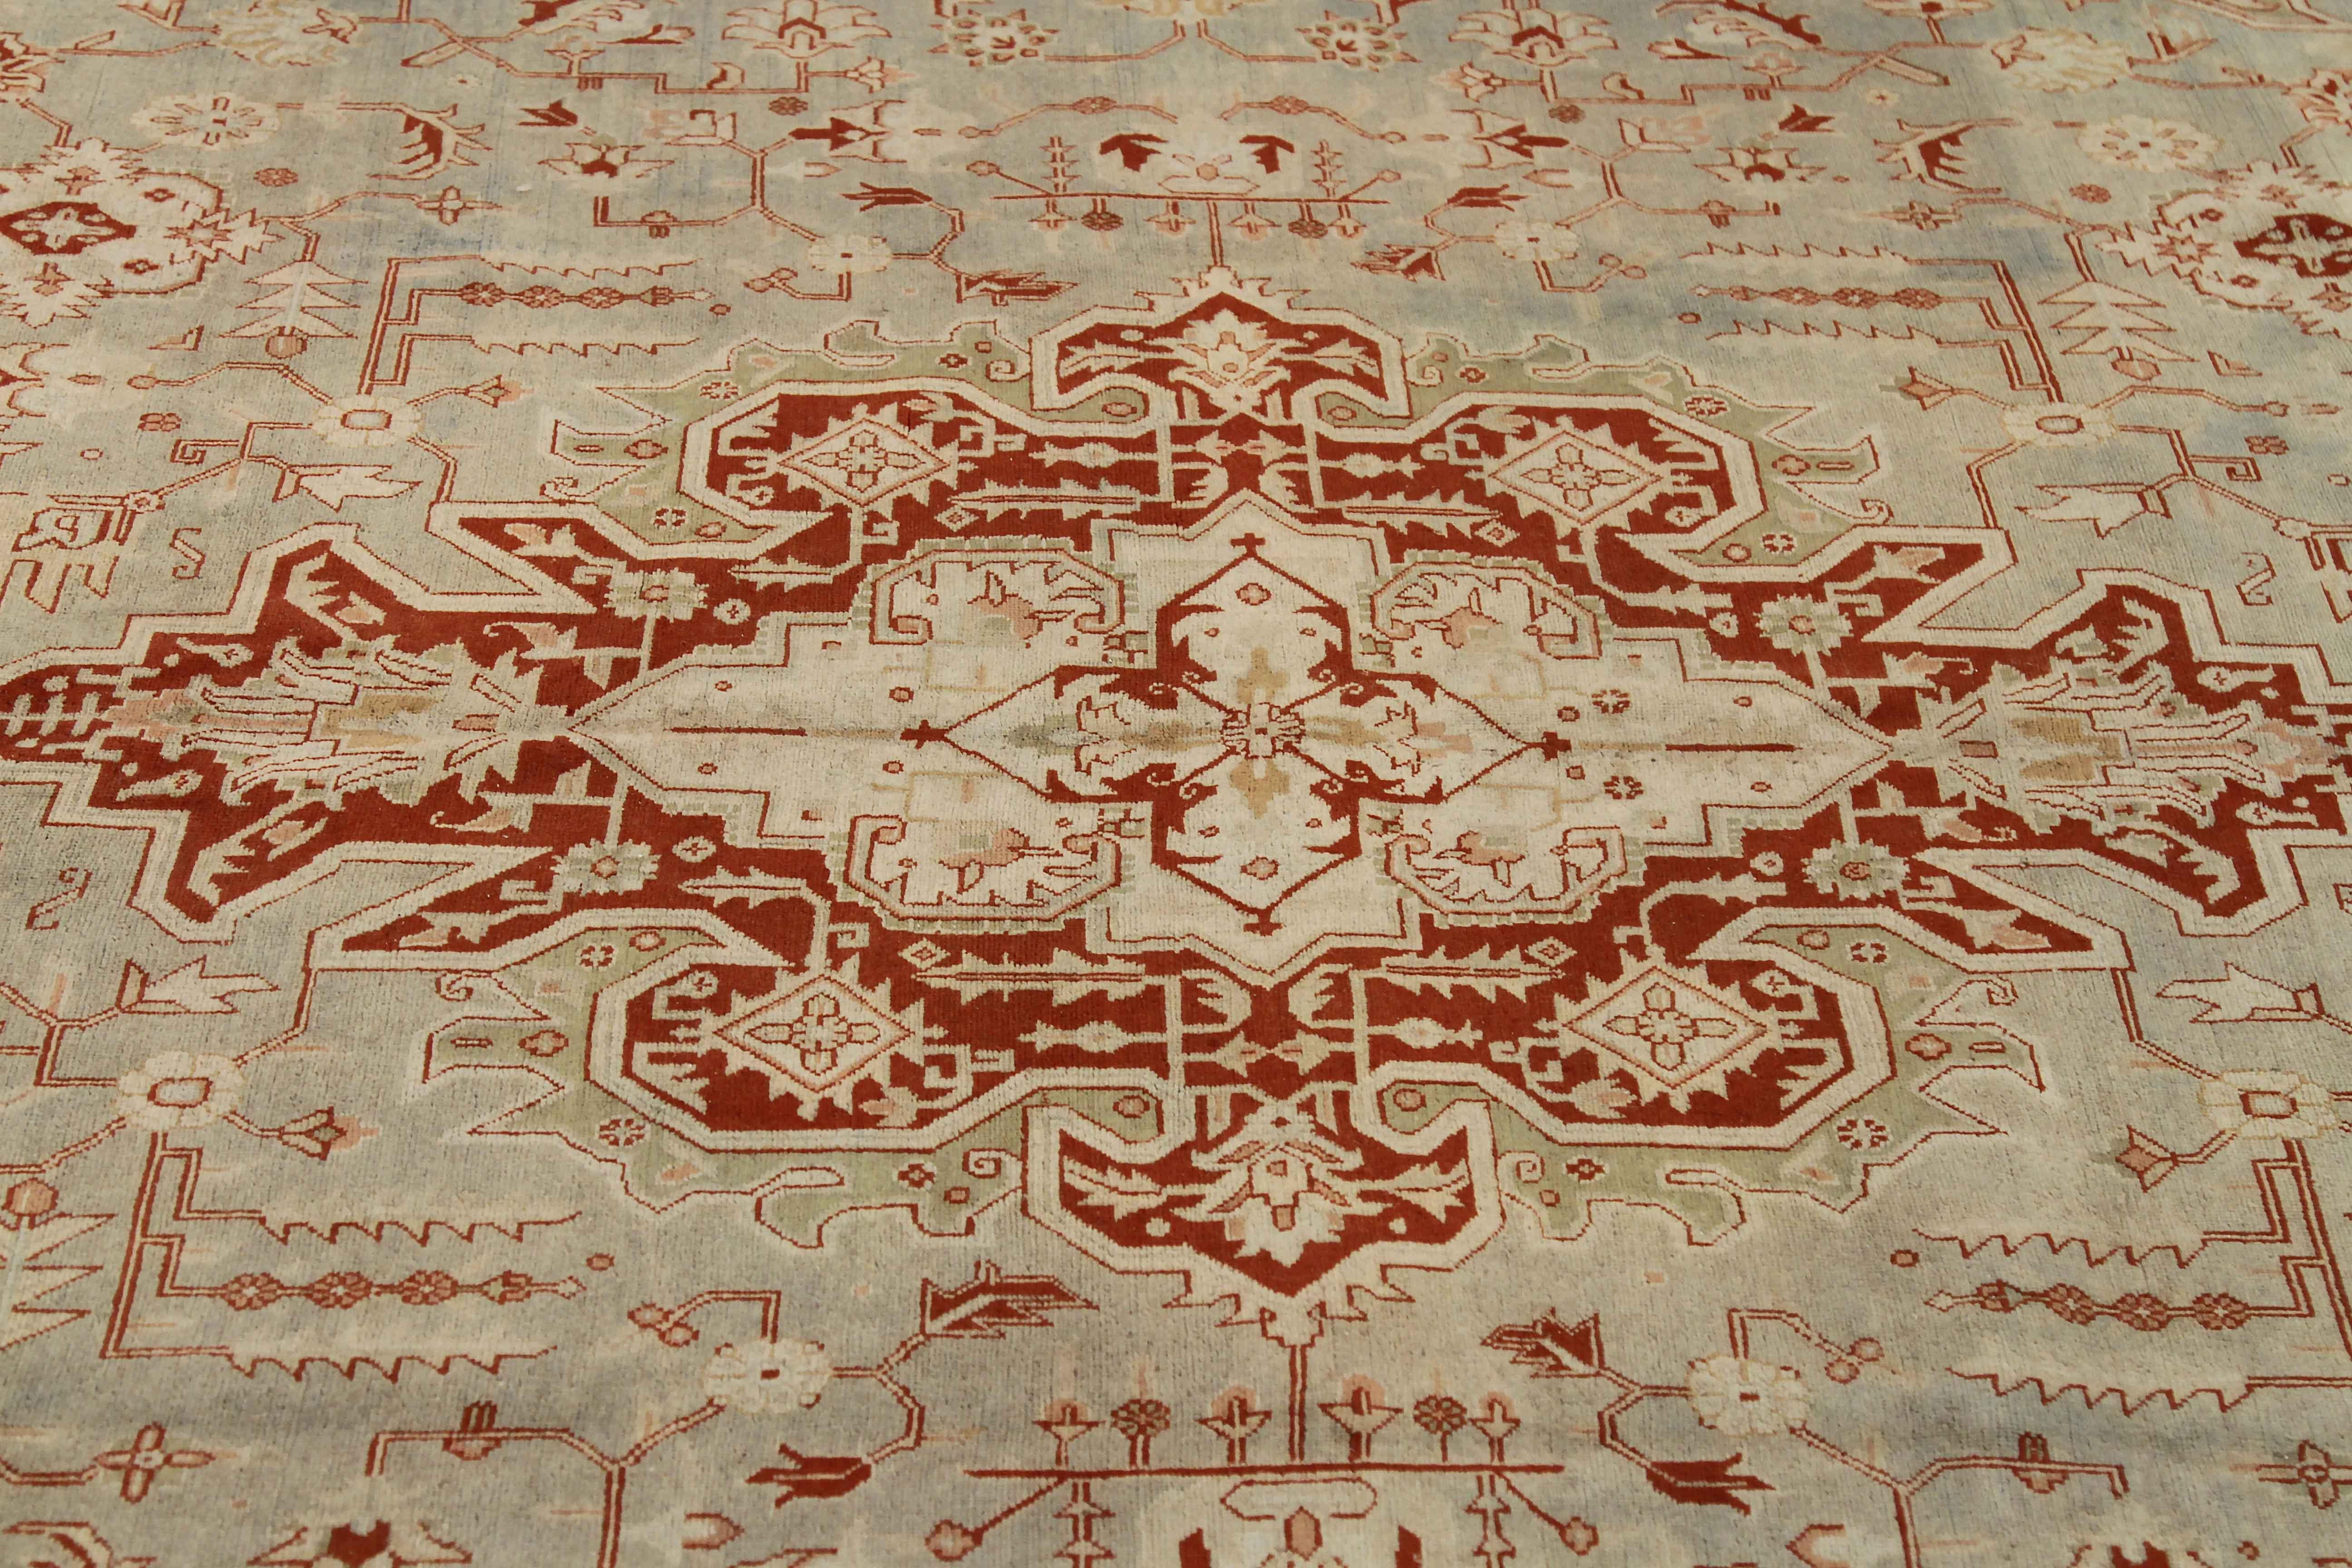 Hand-Woven Antique Persian Tabriz Rug with Floral Details on Red/Beige Field For Sale